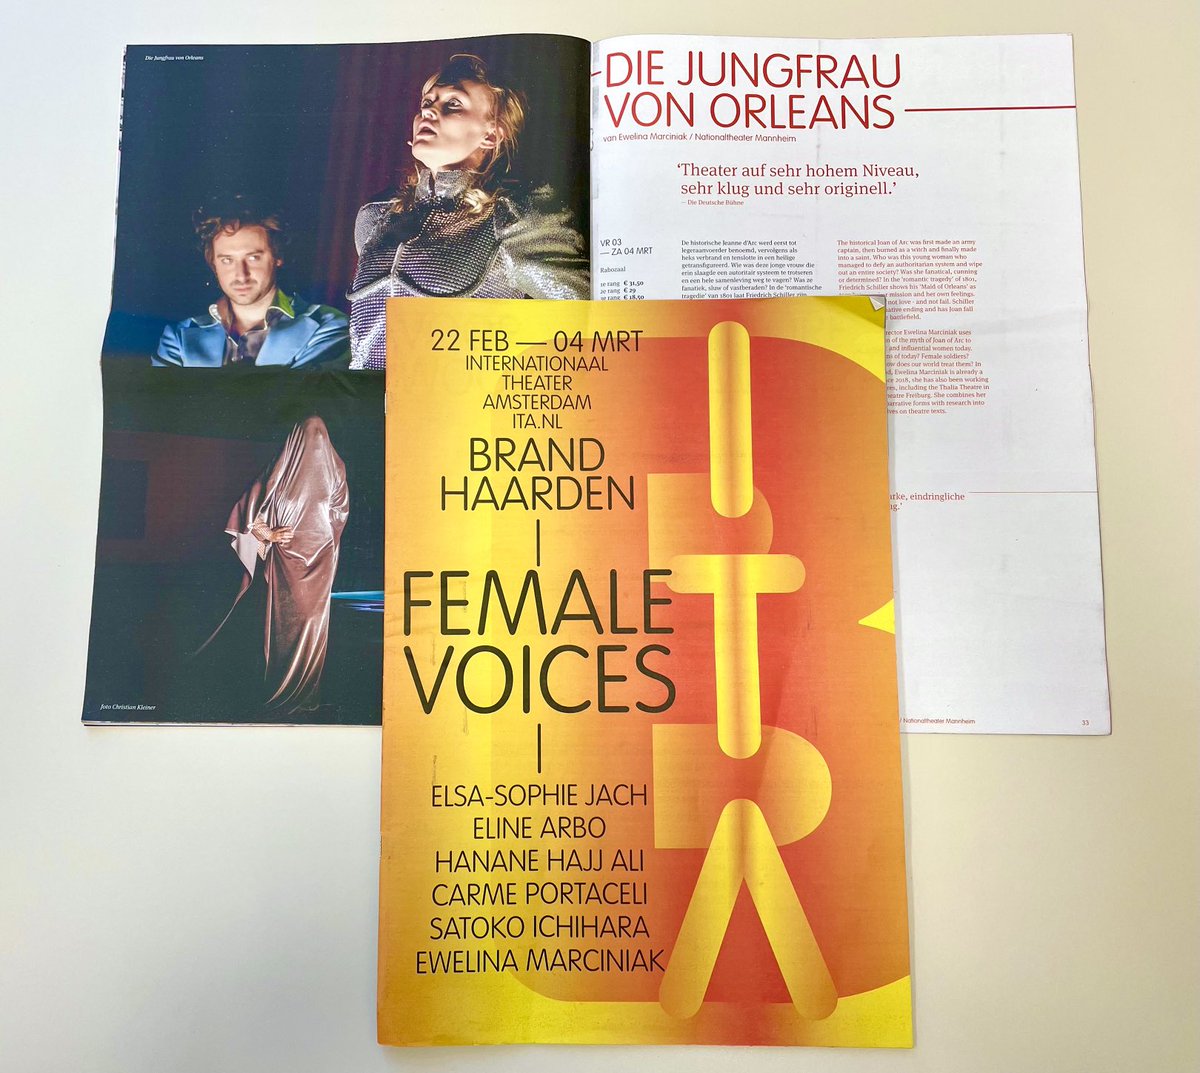 Excited. Tonight and tomorrow we present our production “Jungfrau von Orleans” (based on Schiller, directed by Ewelina Marciniak) at ⁦@ITAamsterdam⁩ as part of the festival “Brandhaarden - Female Voices”. ⁦@NTheaterMA⁩ #Amsterdam #Mannheim #FemaleVoices #Brandhaarden